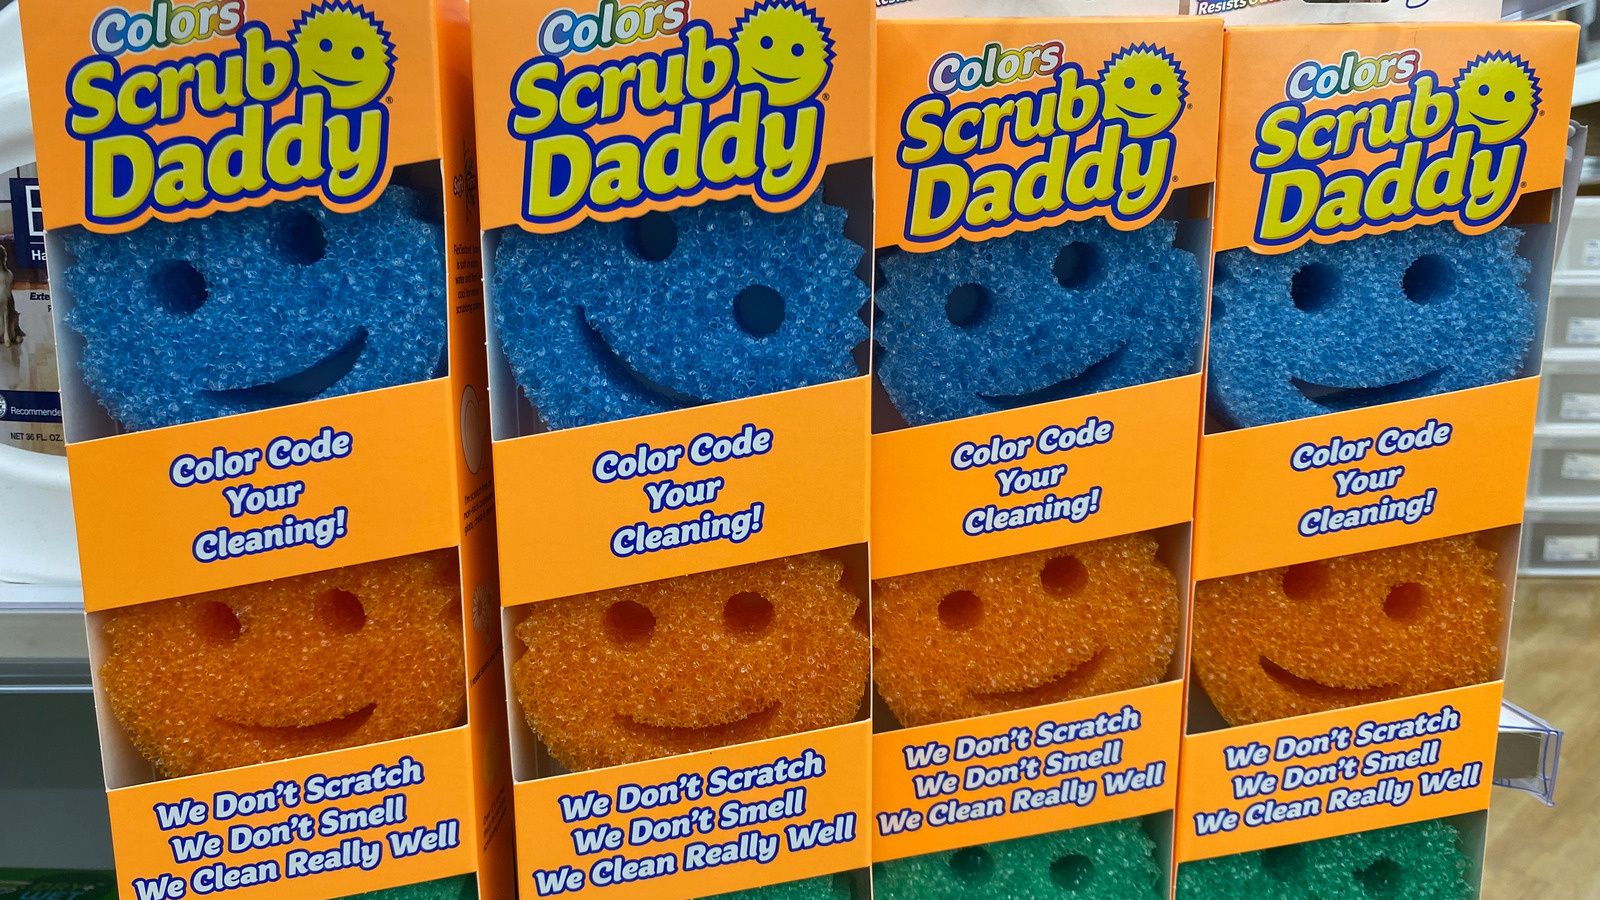 Scrub Daddy vs. Scrub Mommy: What's the difference?